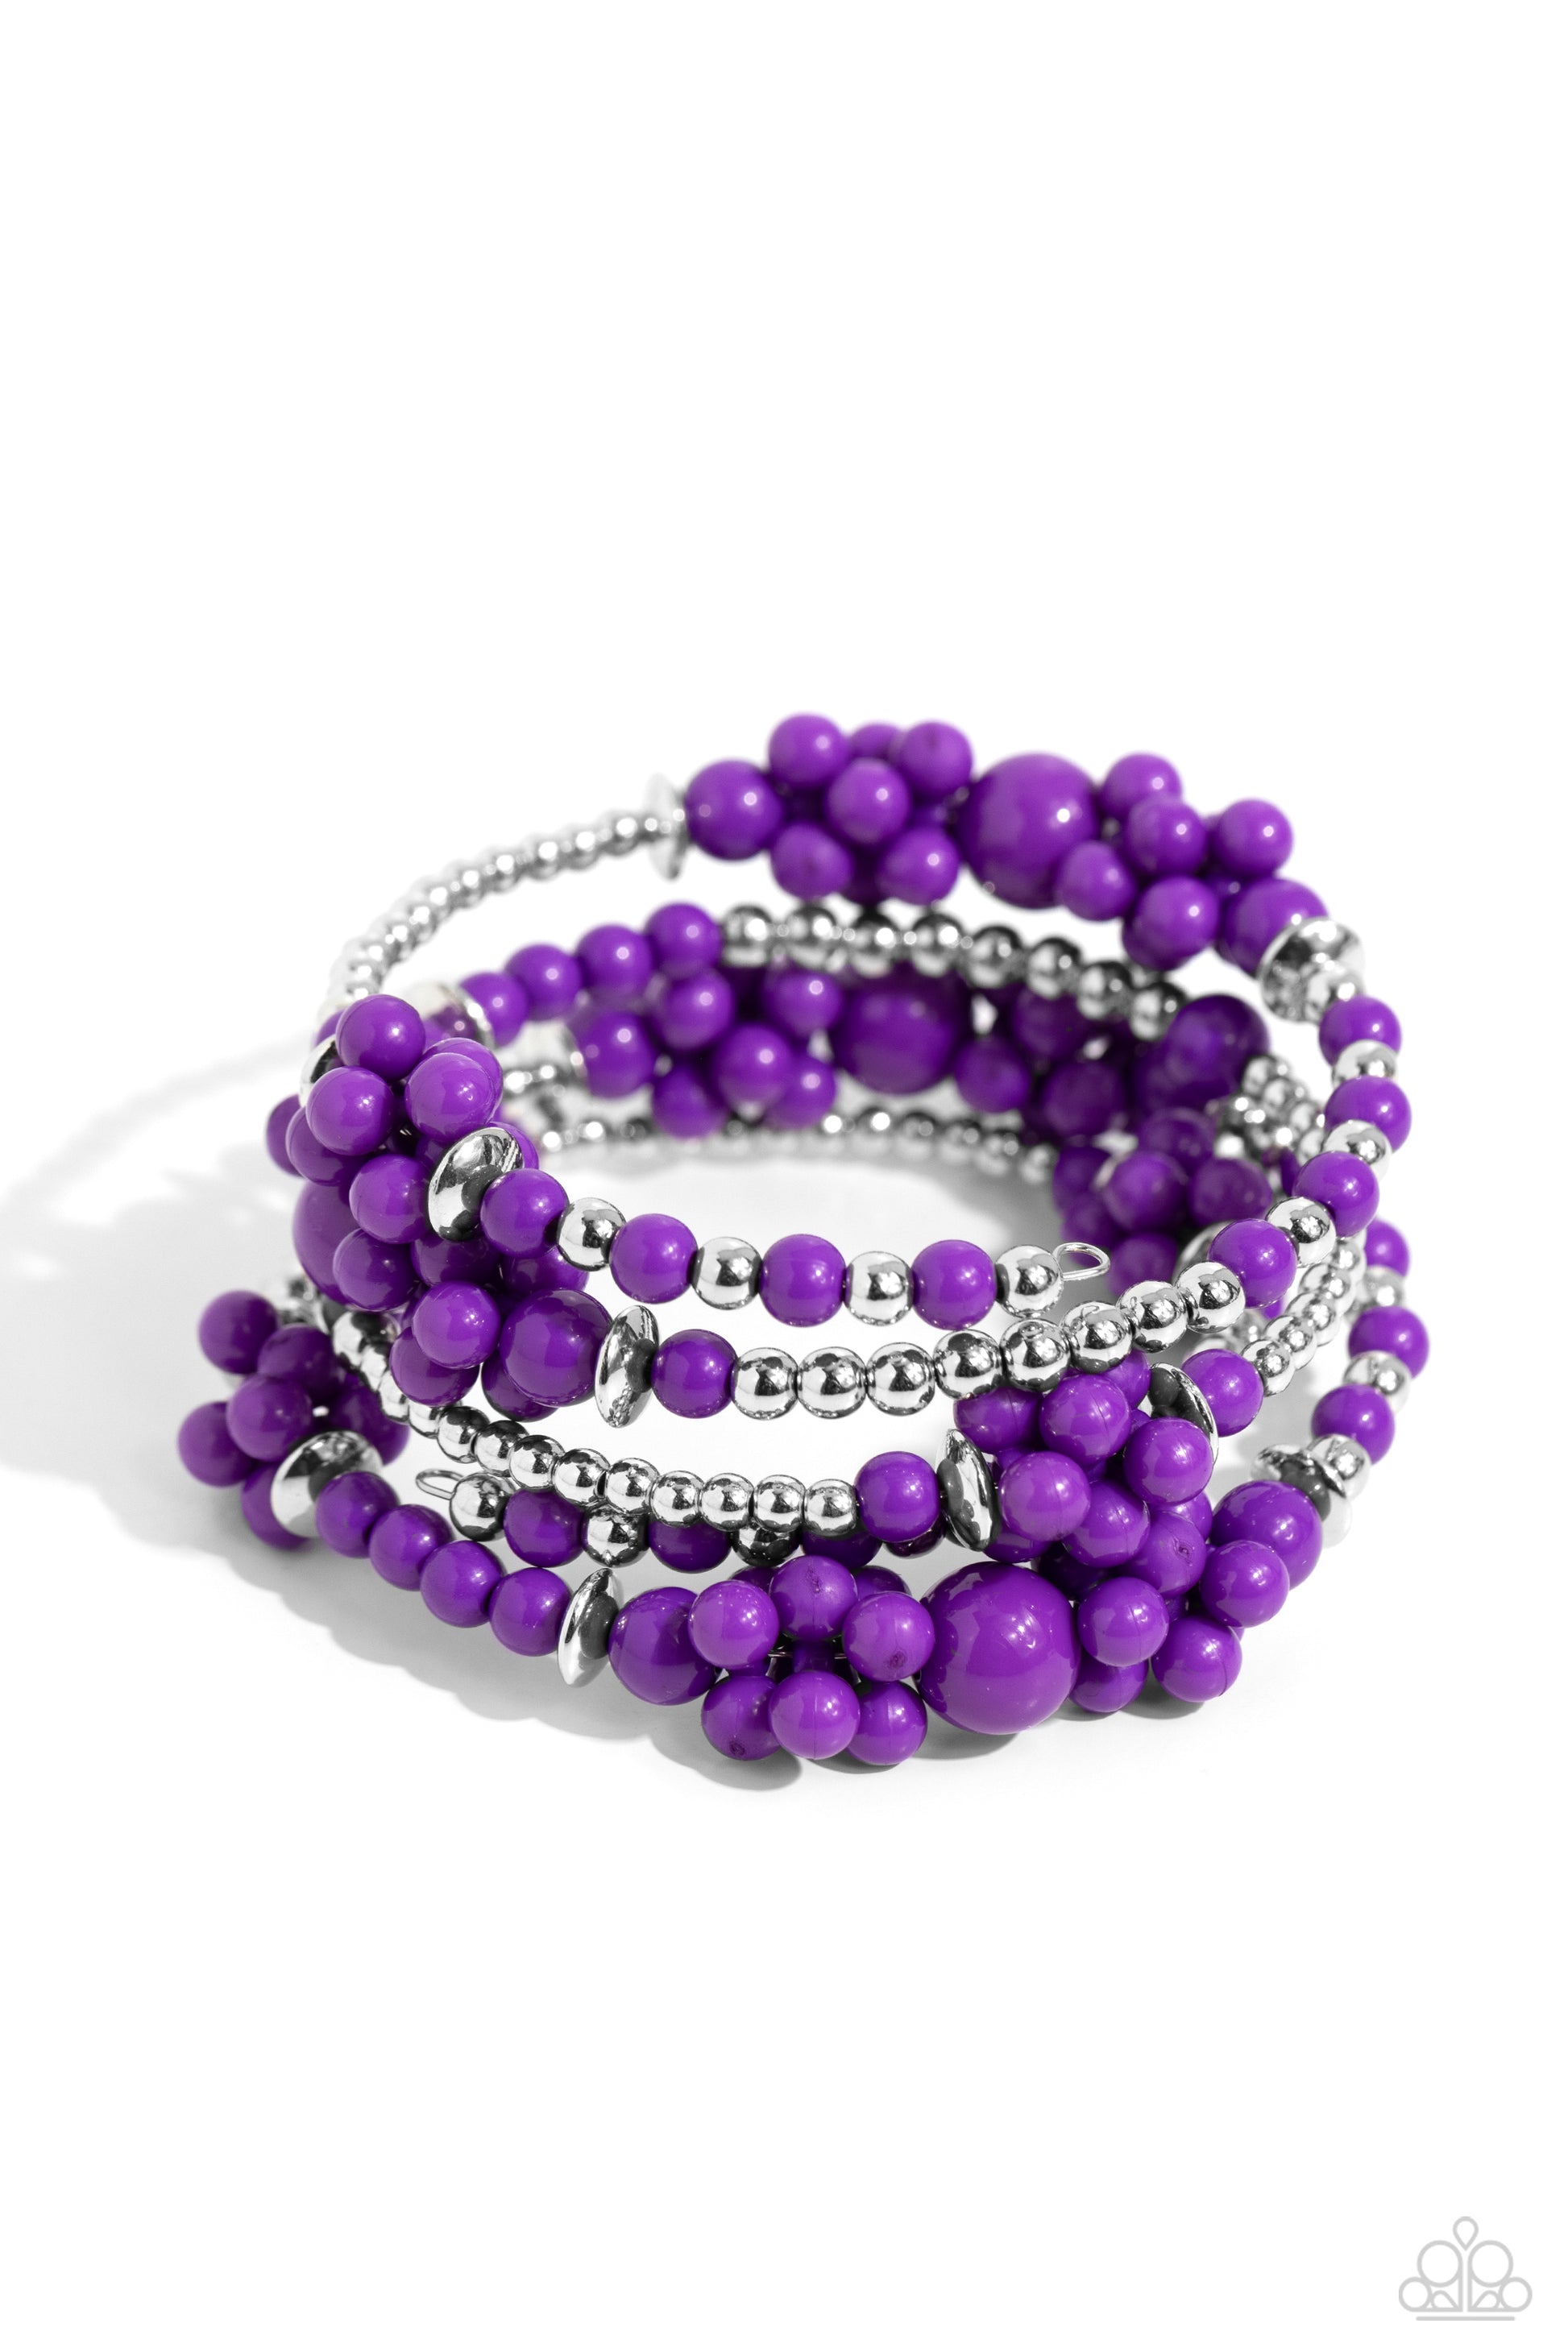 Paparazzi Accessories - Compelling Clouds - Purple Bracelets strands of sleek silver beads and accents mixed with plum acrylic beads in varying sizes are threaded along an infinity wrap-style bracelet. Clusters of beads are sporadically infused along the design, creating cloud-like, ethereal layers around the wrist.  Sold as one individual bracelet.